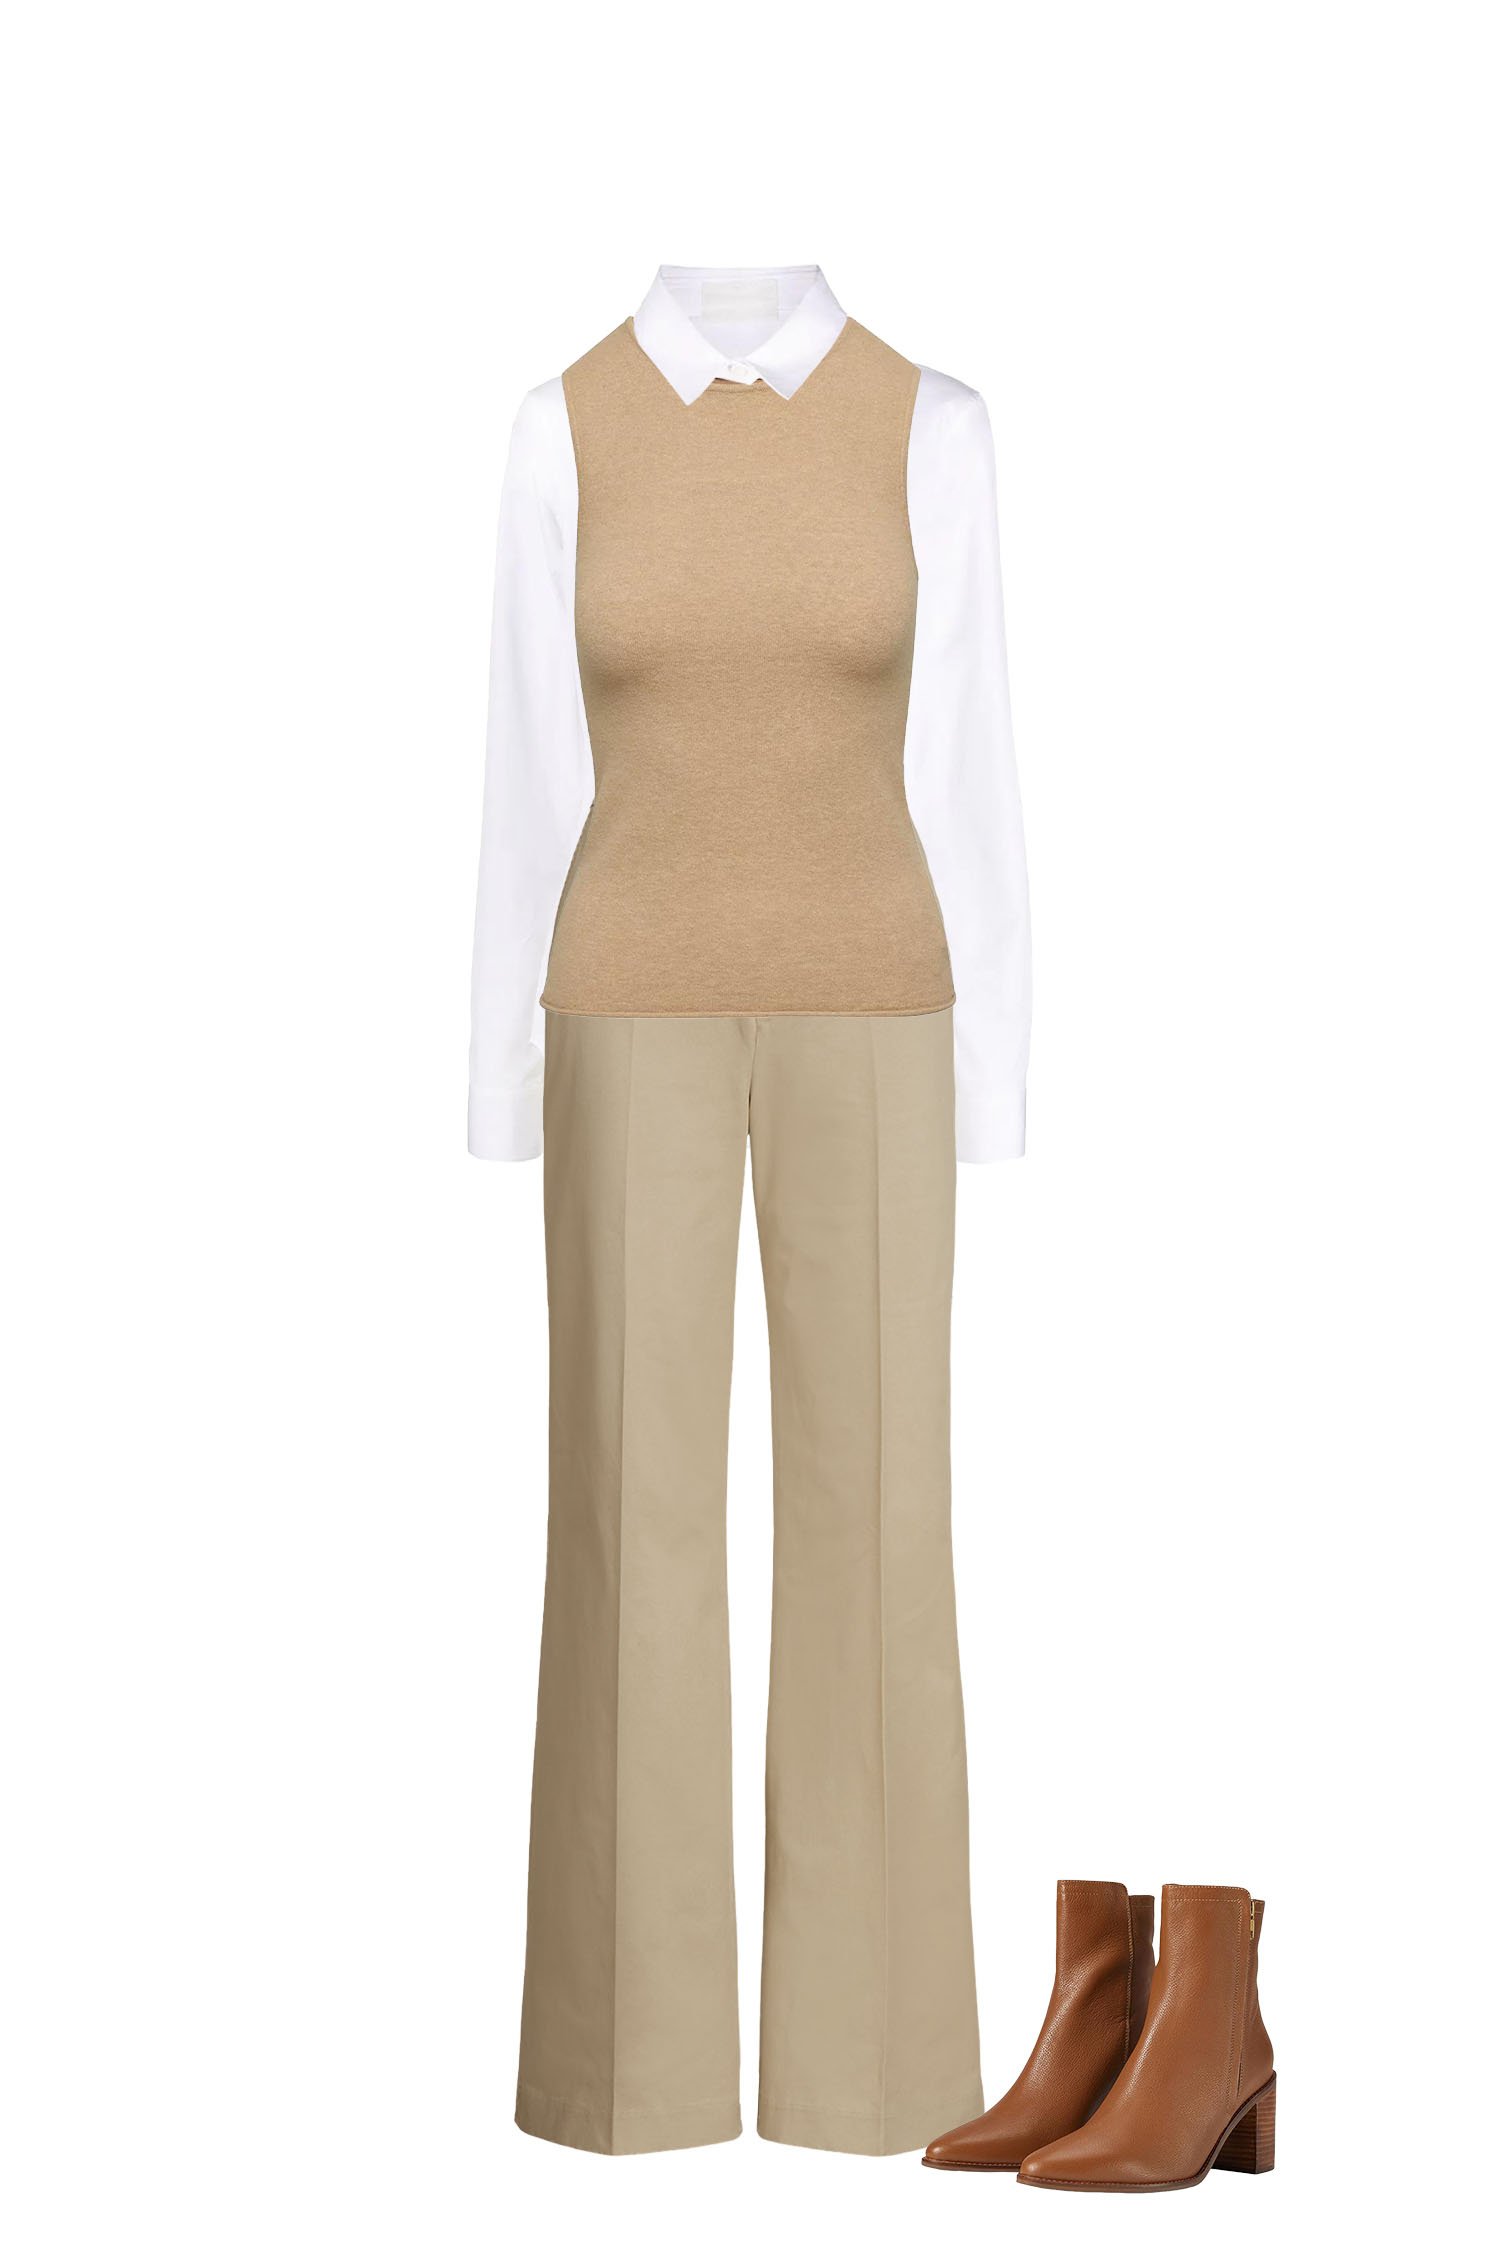 Business Casual Outfit - Tan Wide Leg High-Waisted Pants, White Shirt, Tan Sweater Vest, Brown Stacked Heel Ankle Boots